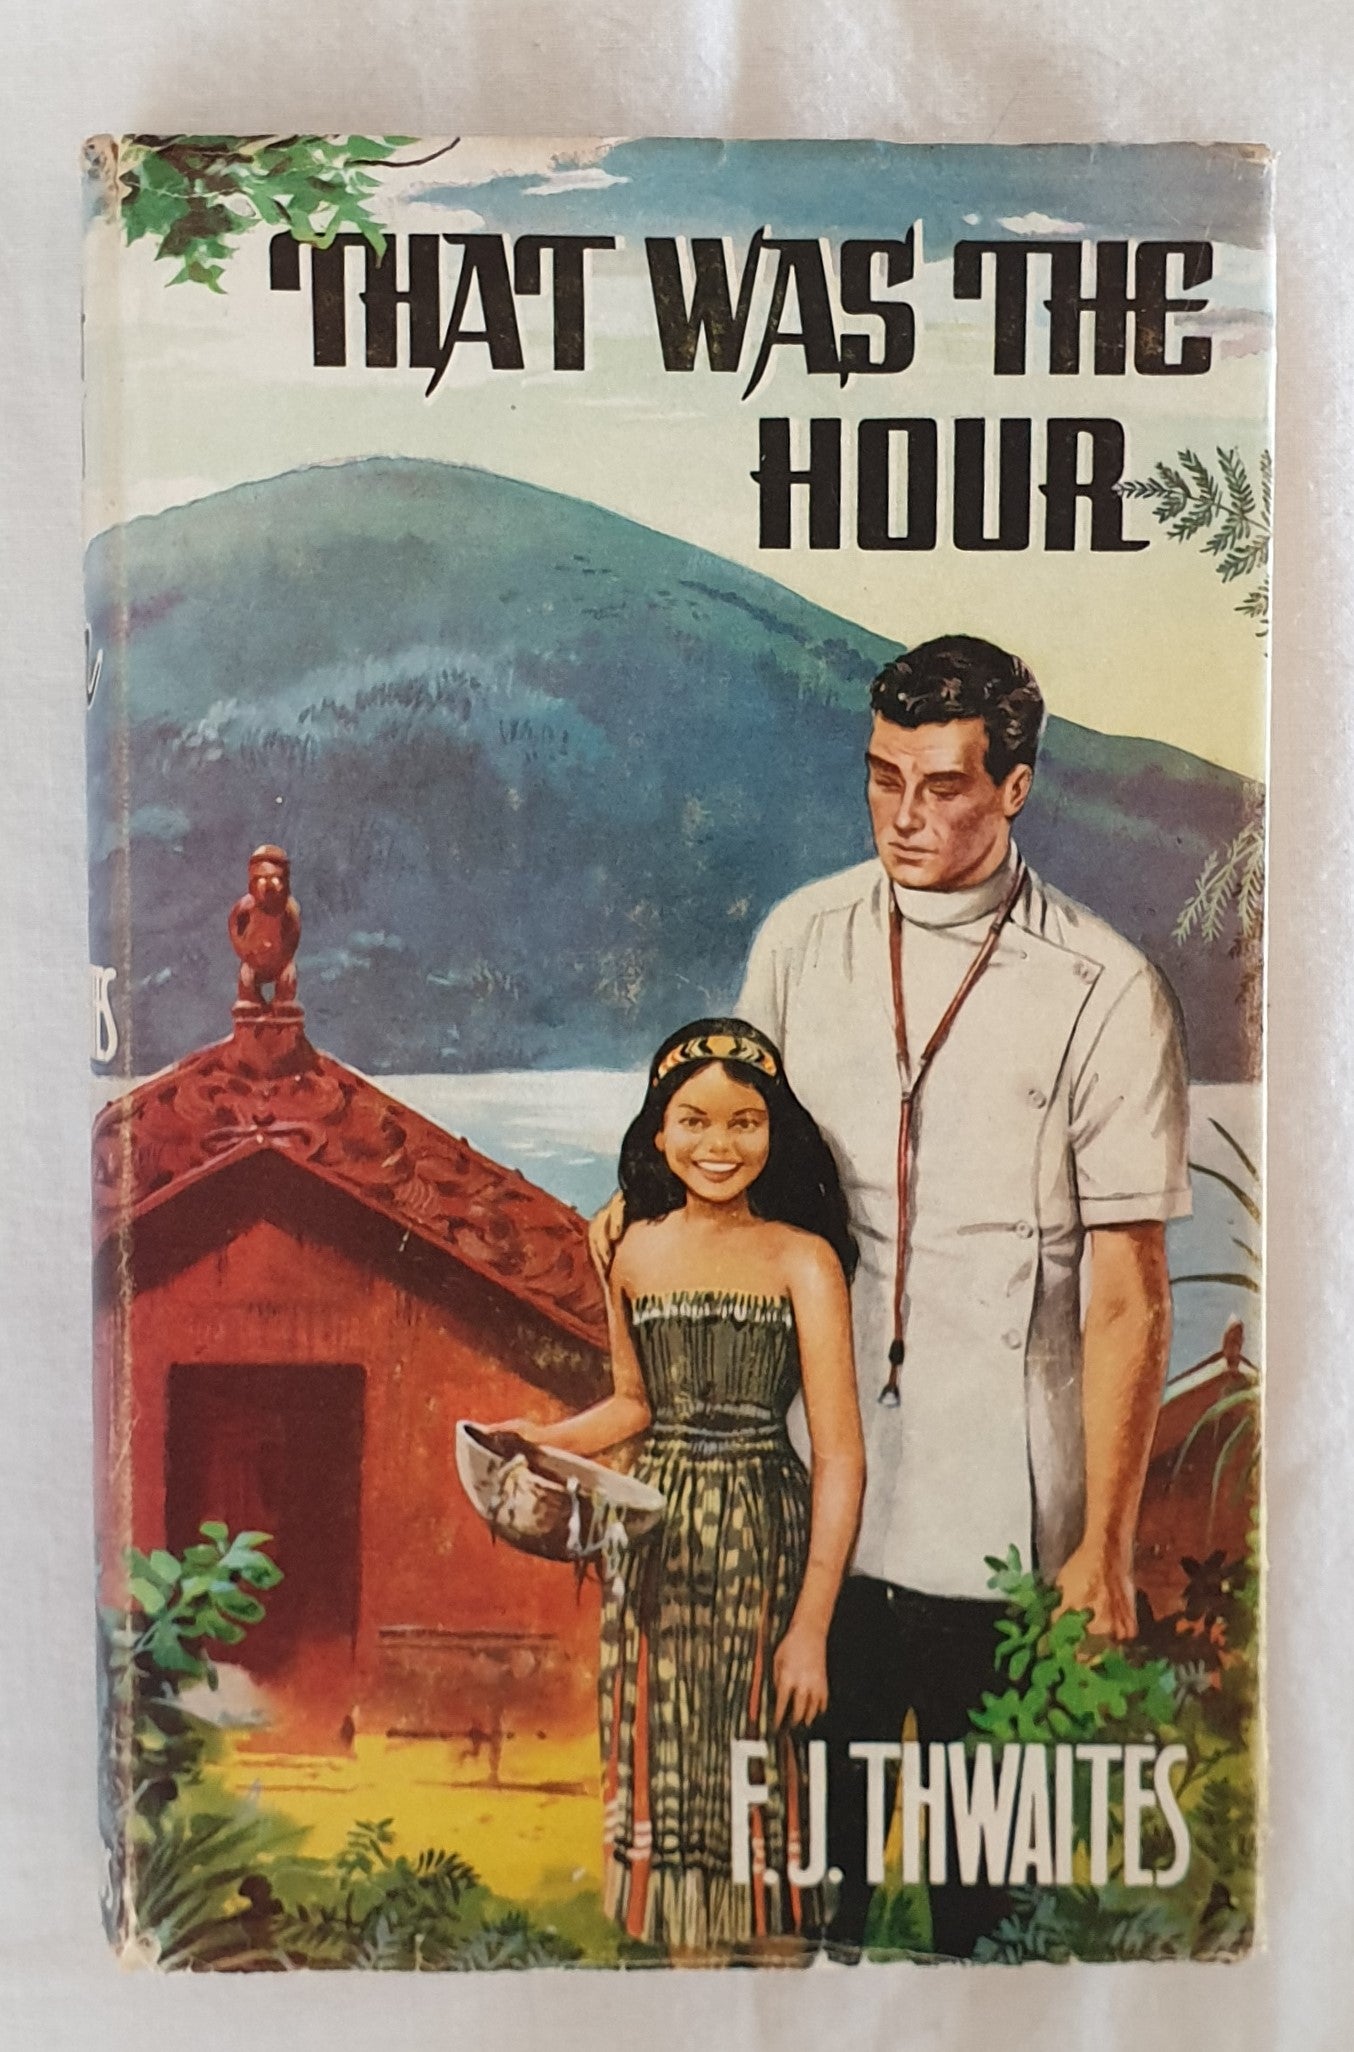 That Was The Hour by Frederick J. Thwaites